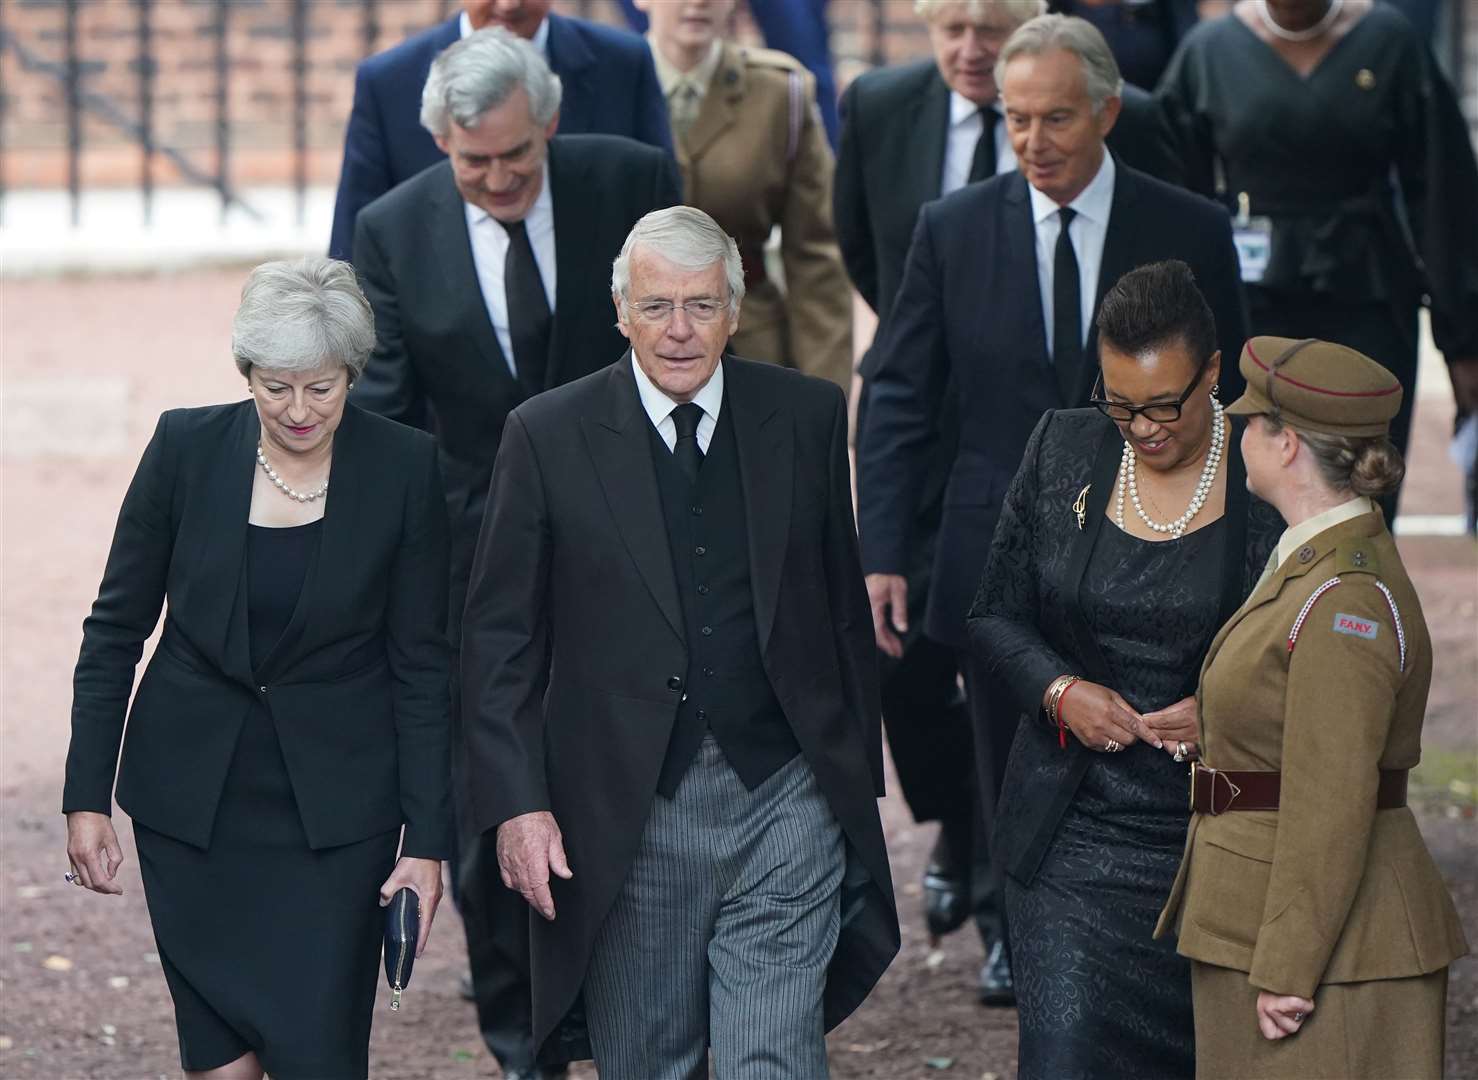 Former prime ministers Theresa May and John Major, with Commonwealth secretary-general Baroness Scotland arriving (Joe Giddens/PA)